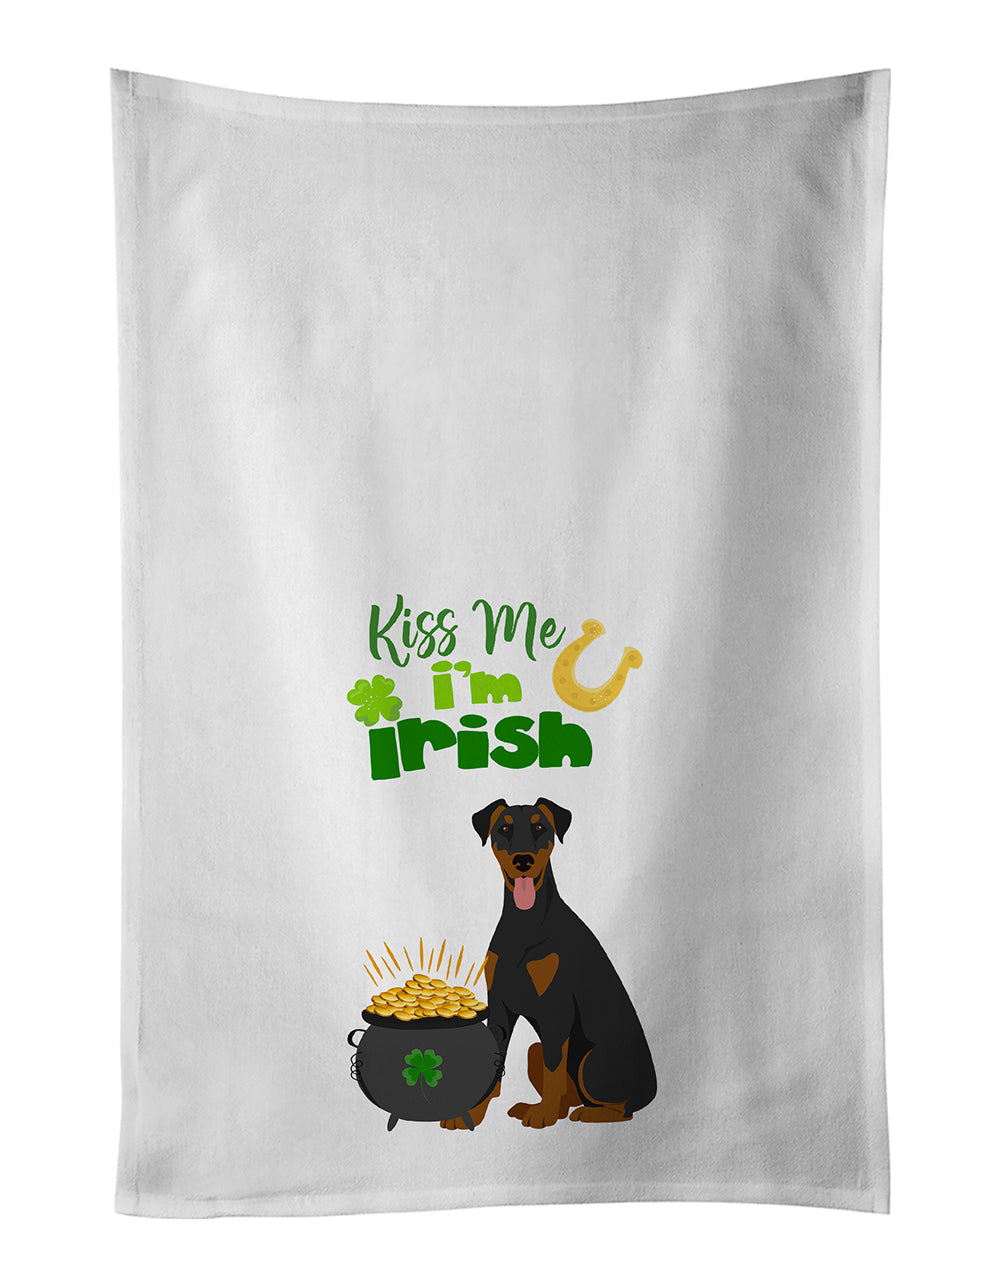 Buy this Natural Ear Black and Tan Doberman Pinscher St. Patrick's Day White Kitchen Towel Set of 2 Dish Towels